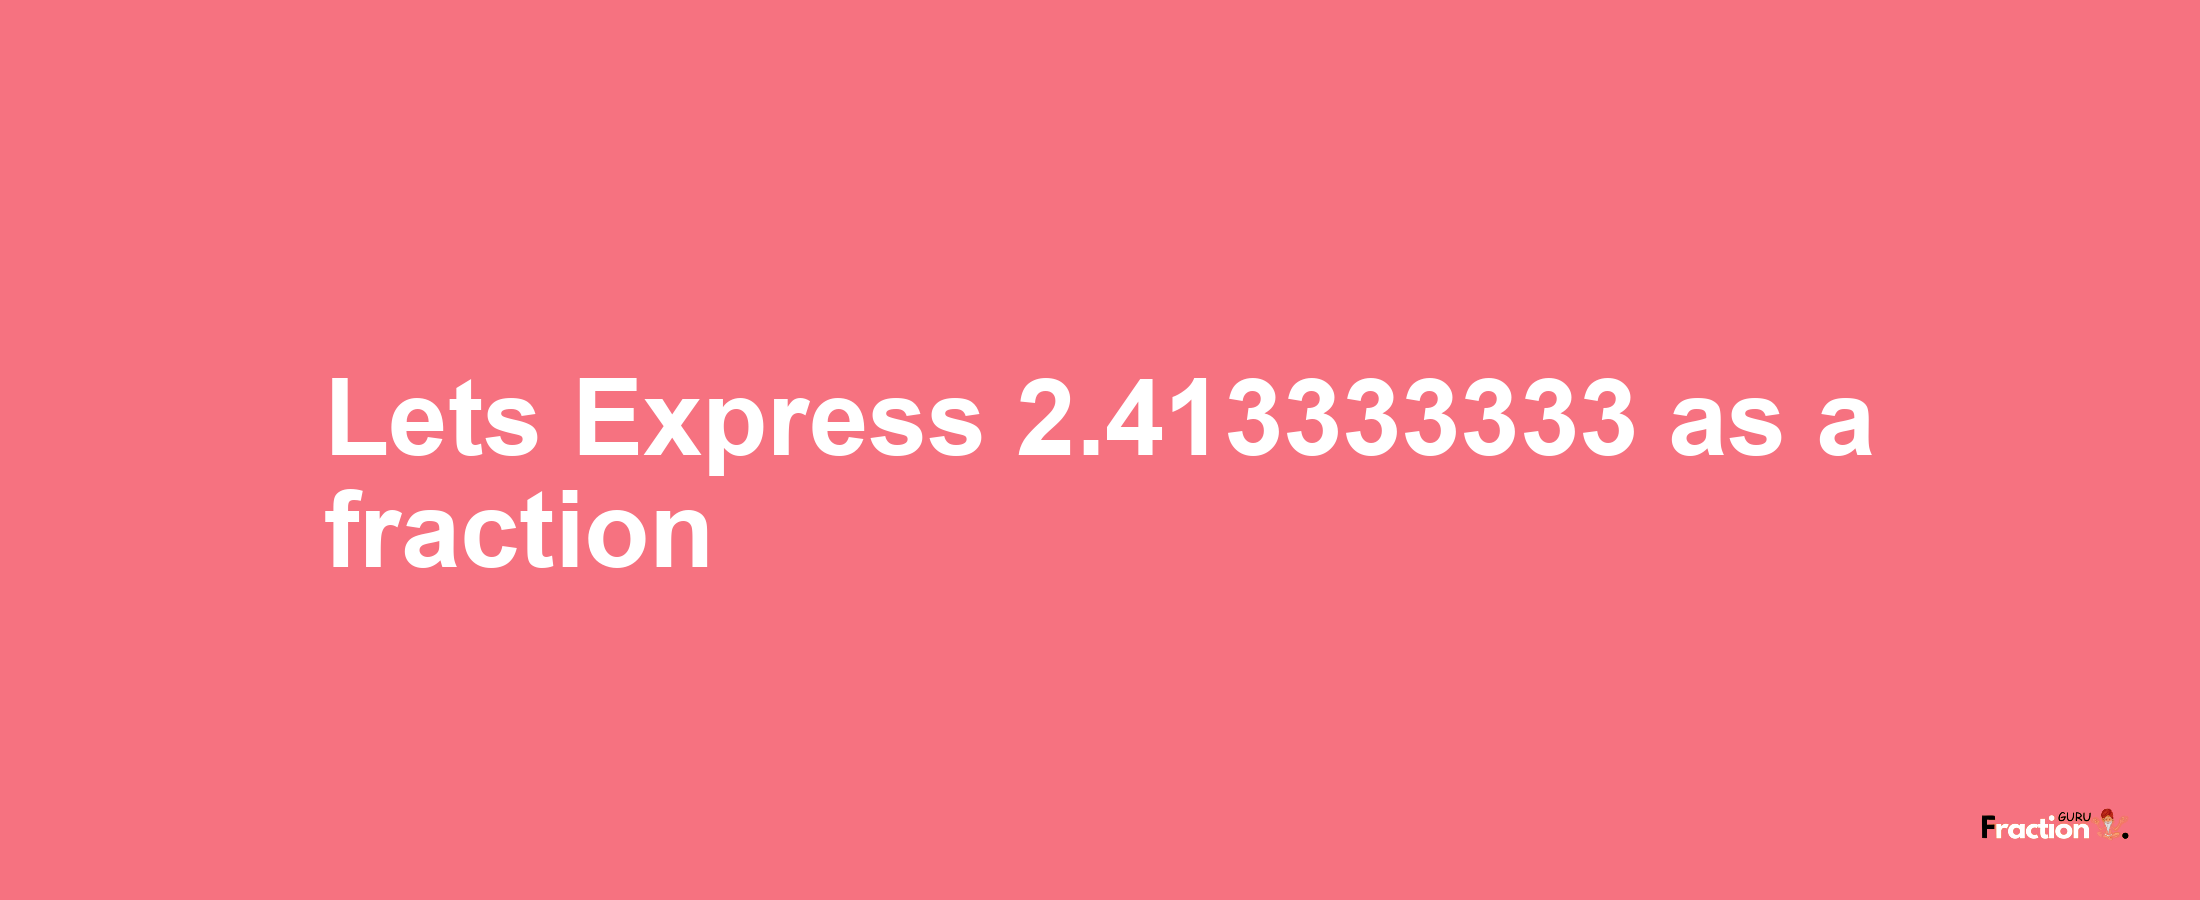 Lets Express 2.413333333 as afraction